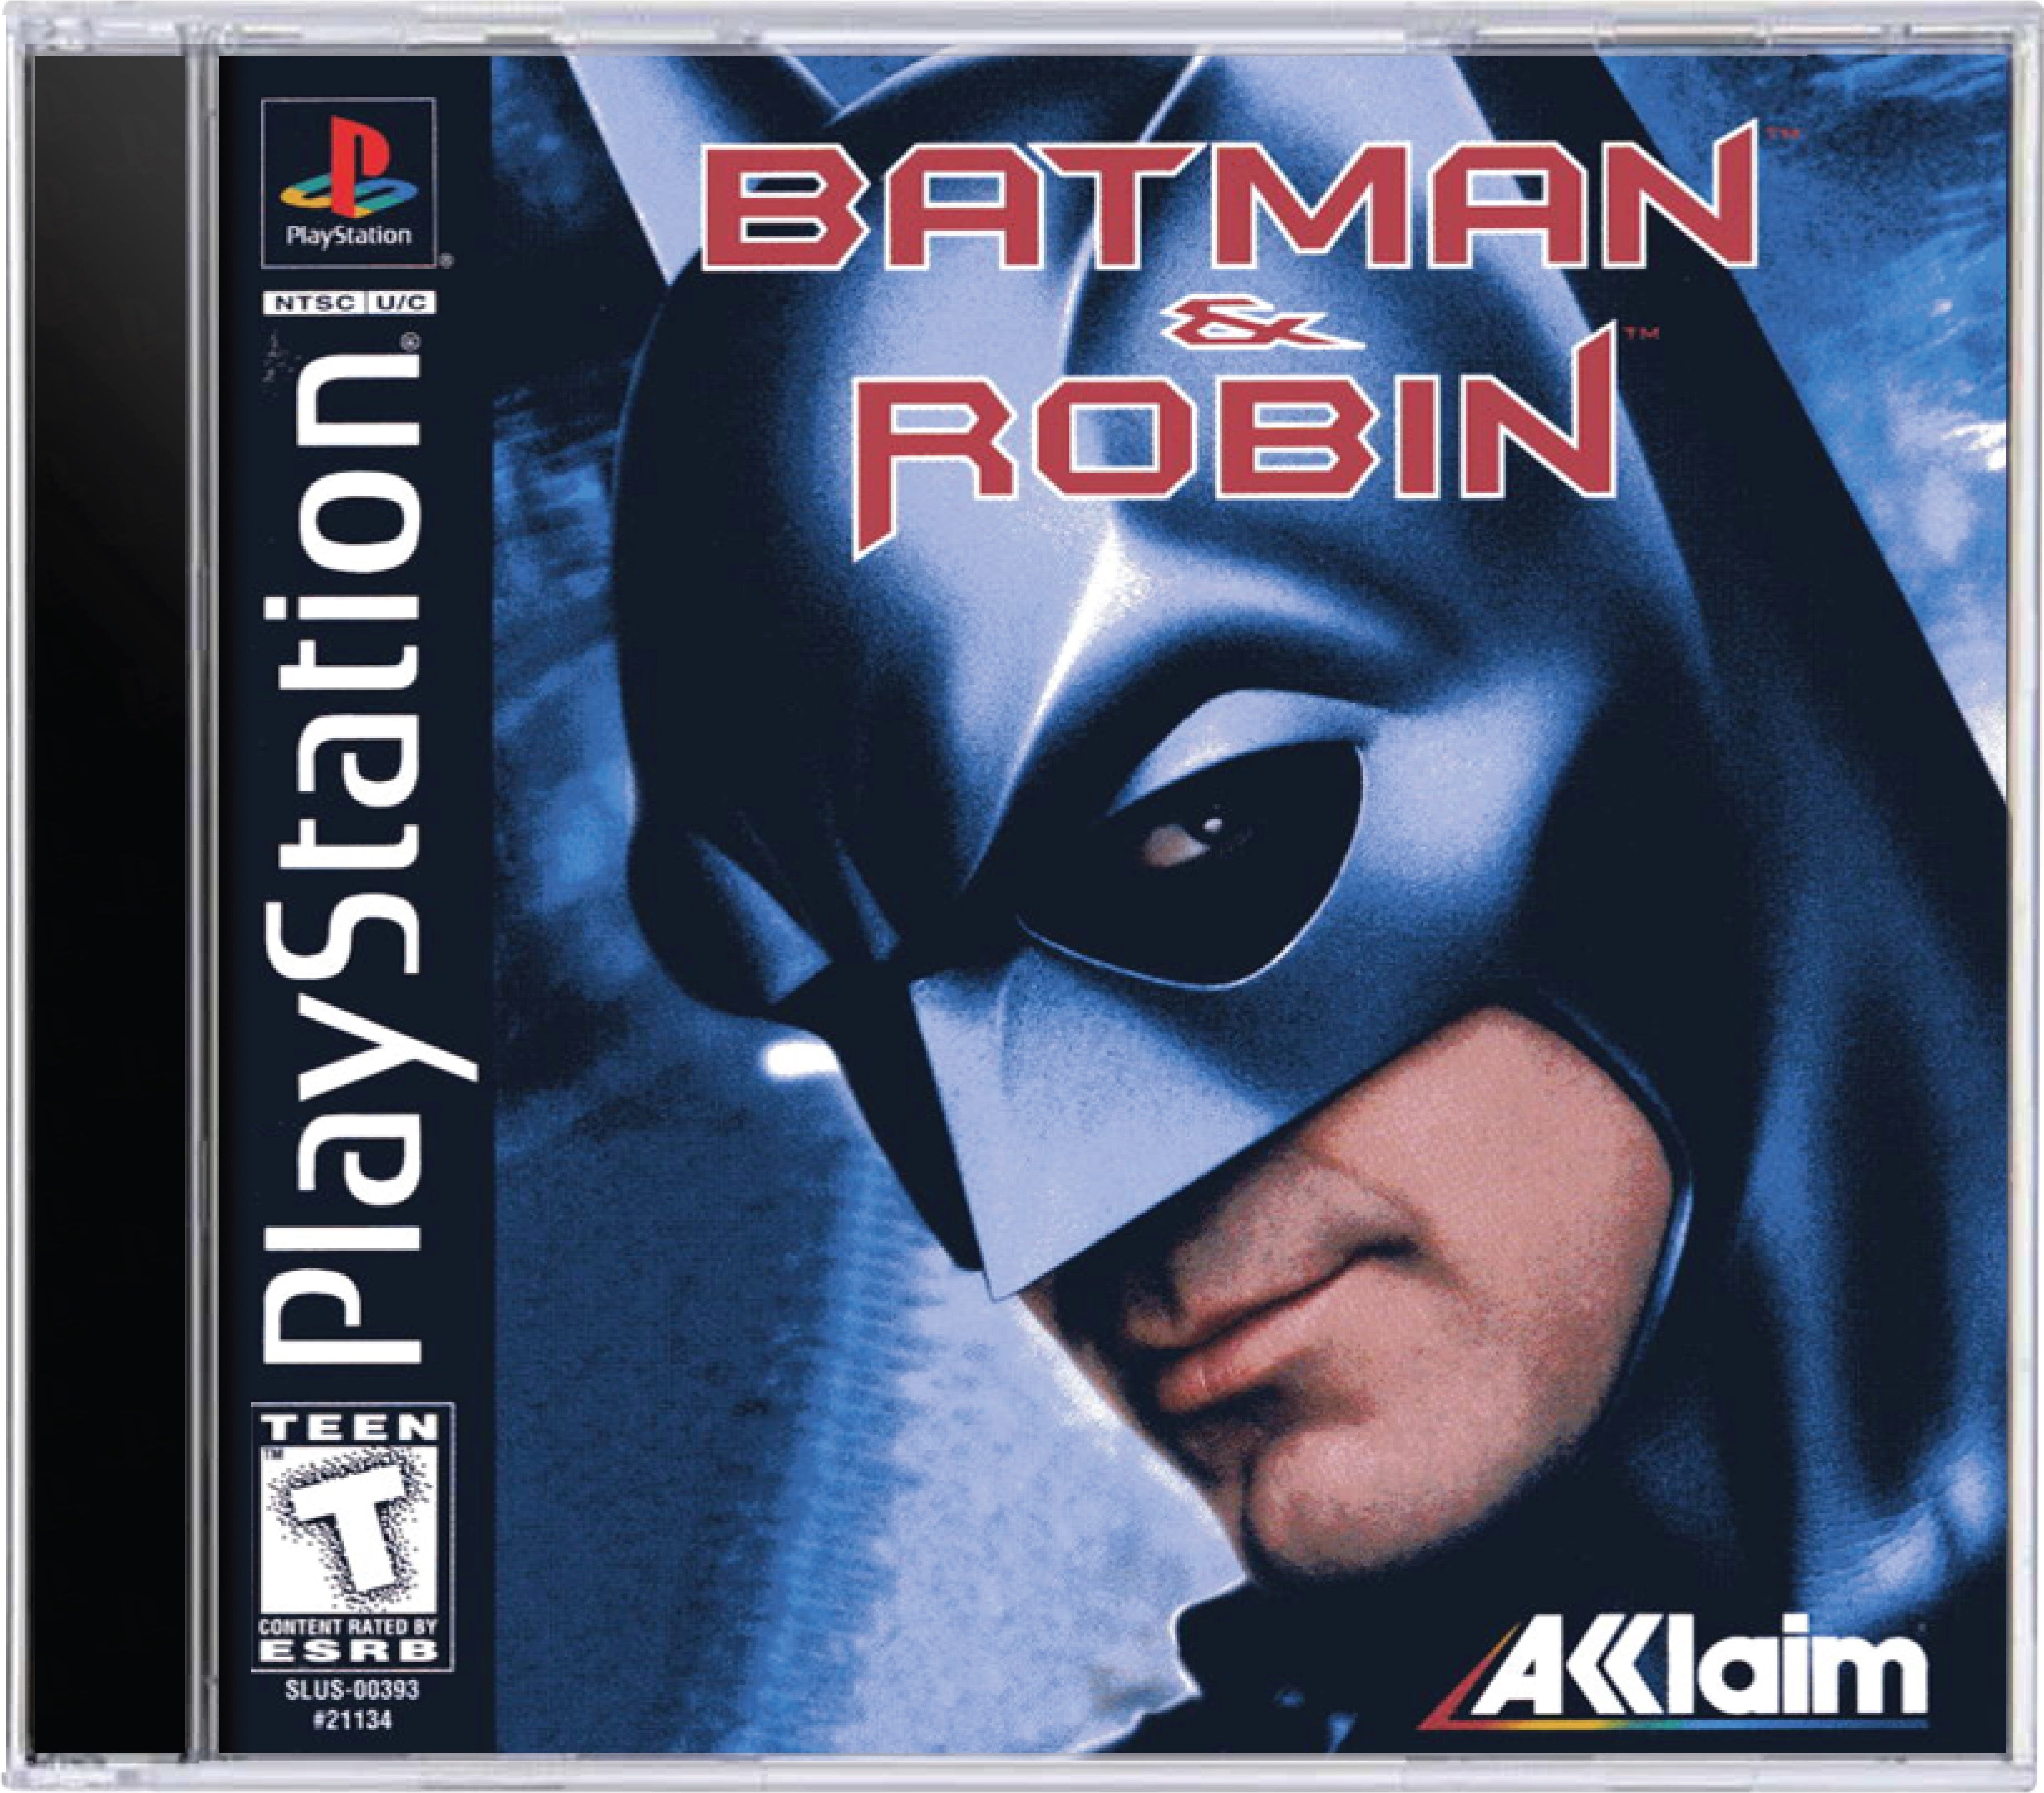 Batman and Robin Cover Art and Product Photo